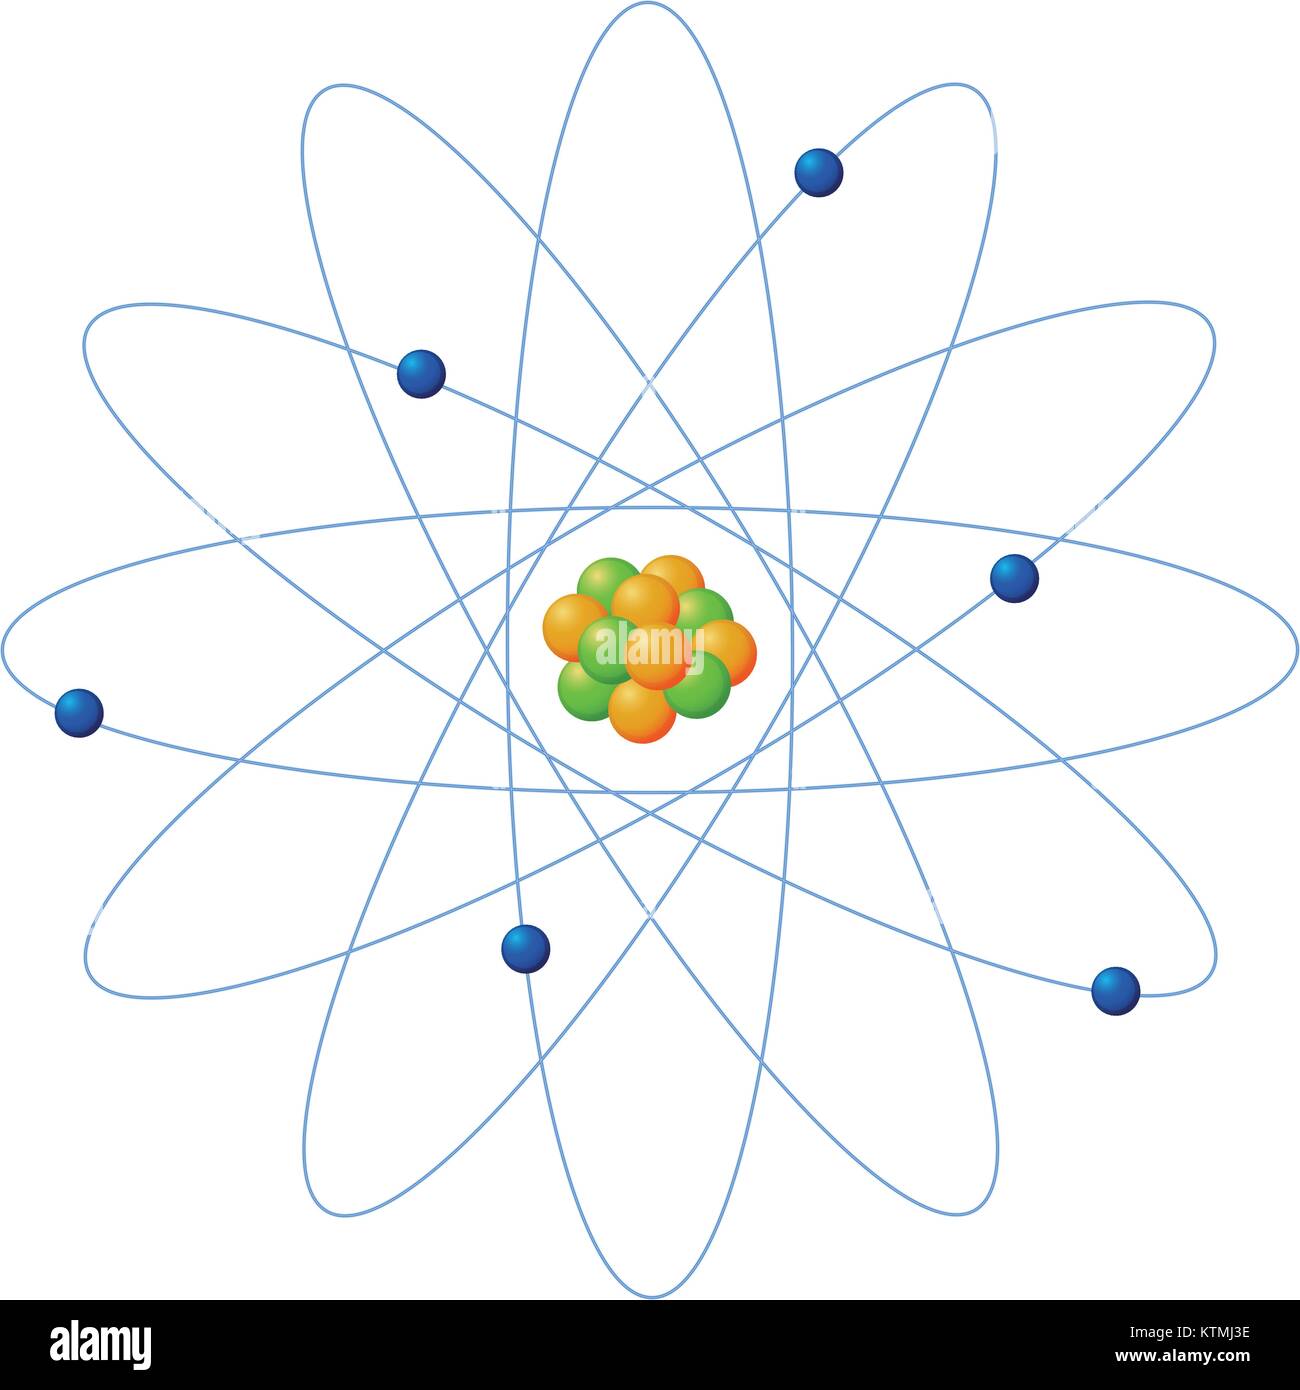 Illustration of atom structure on white Stock Vector